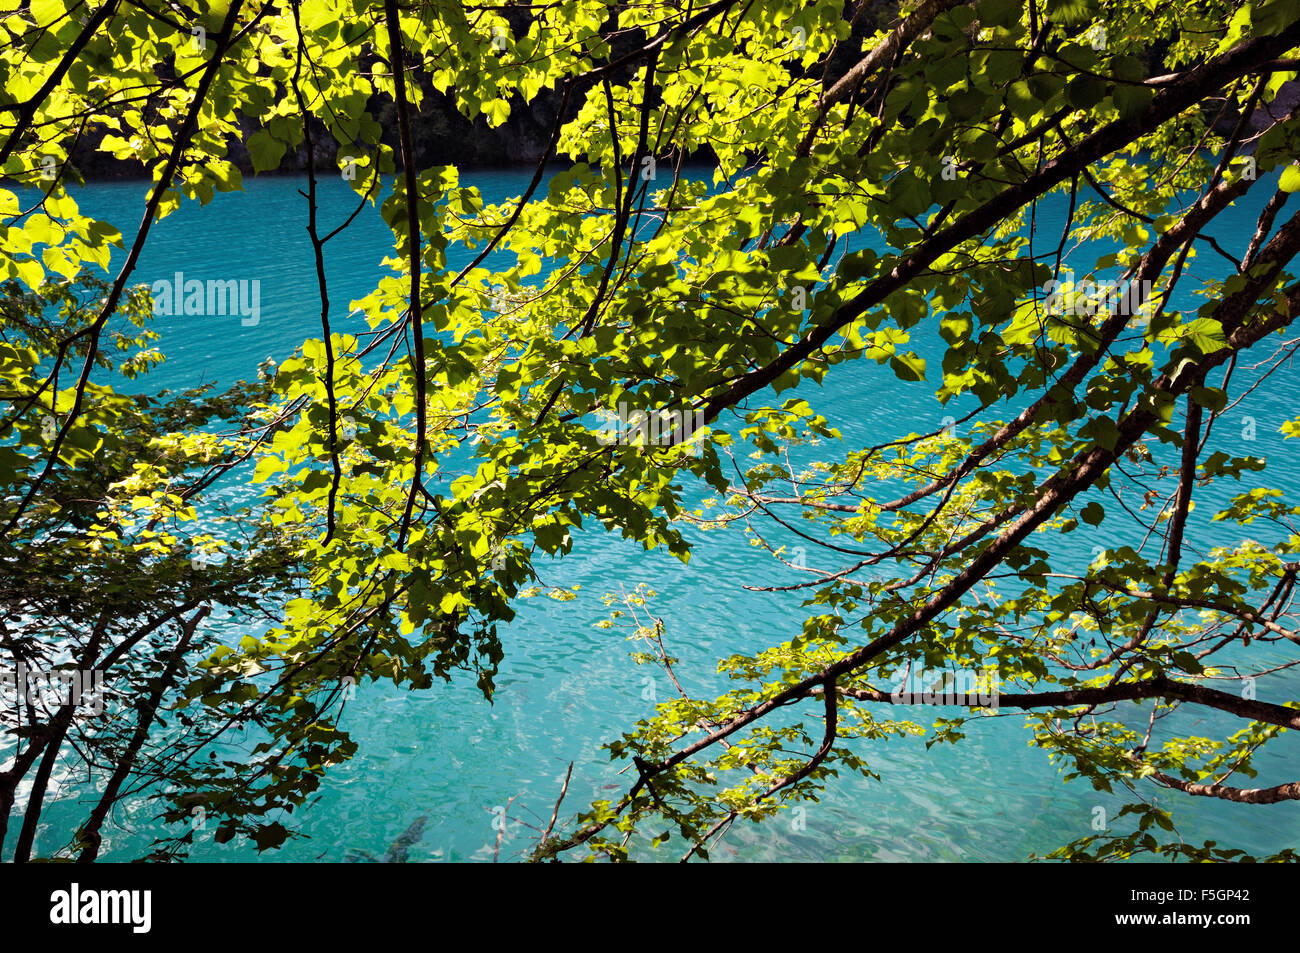 Green leaves and turquoise water in Plitvice Lakes National Park, Lower lakes group, Croatia Stock Photo